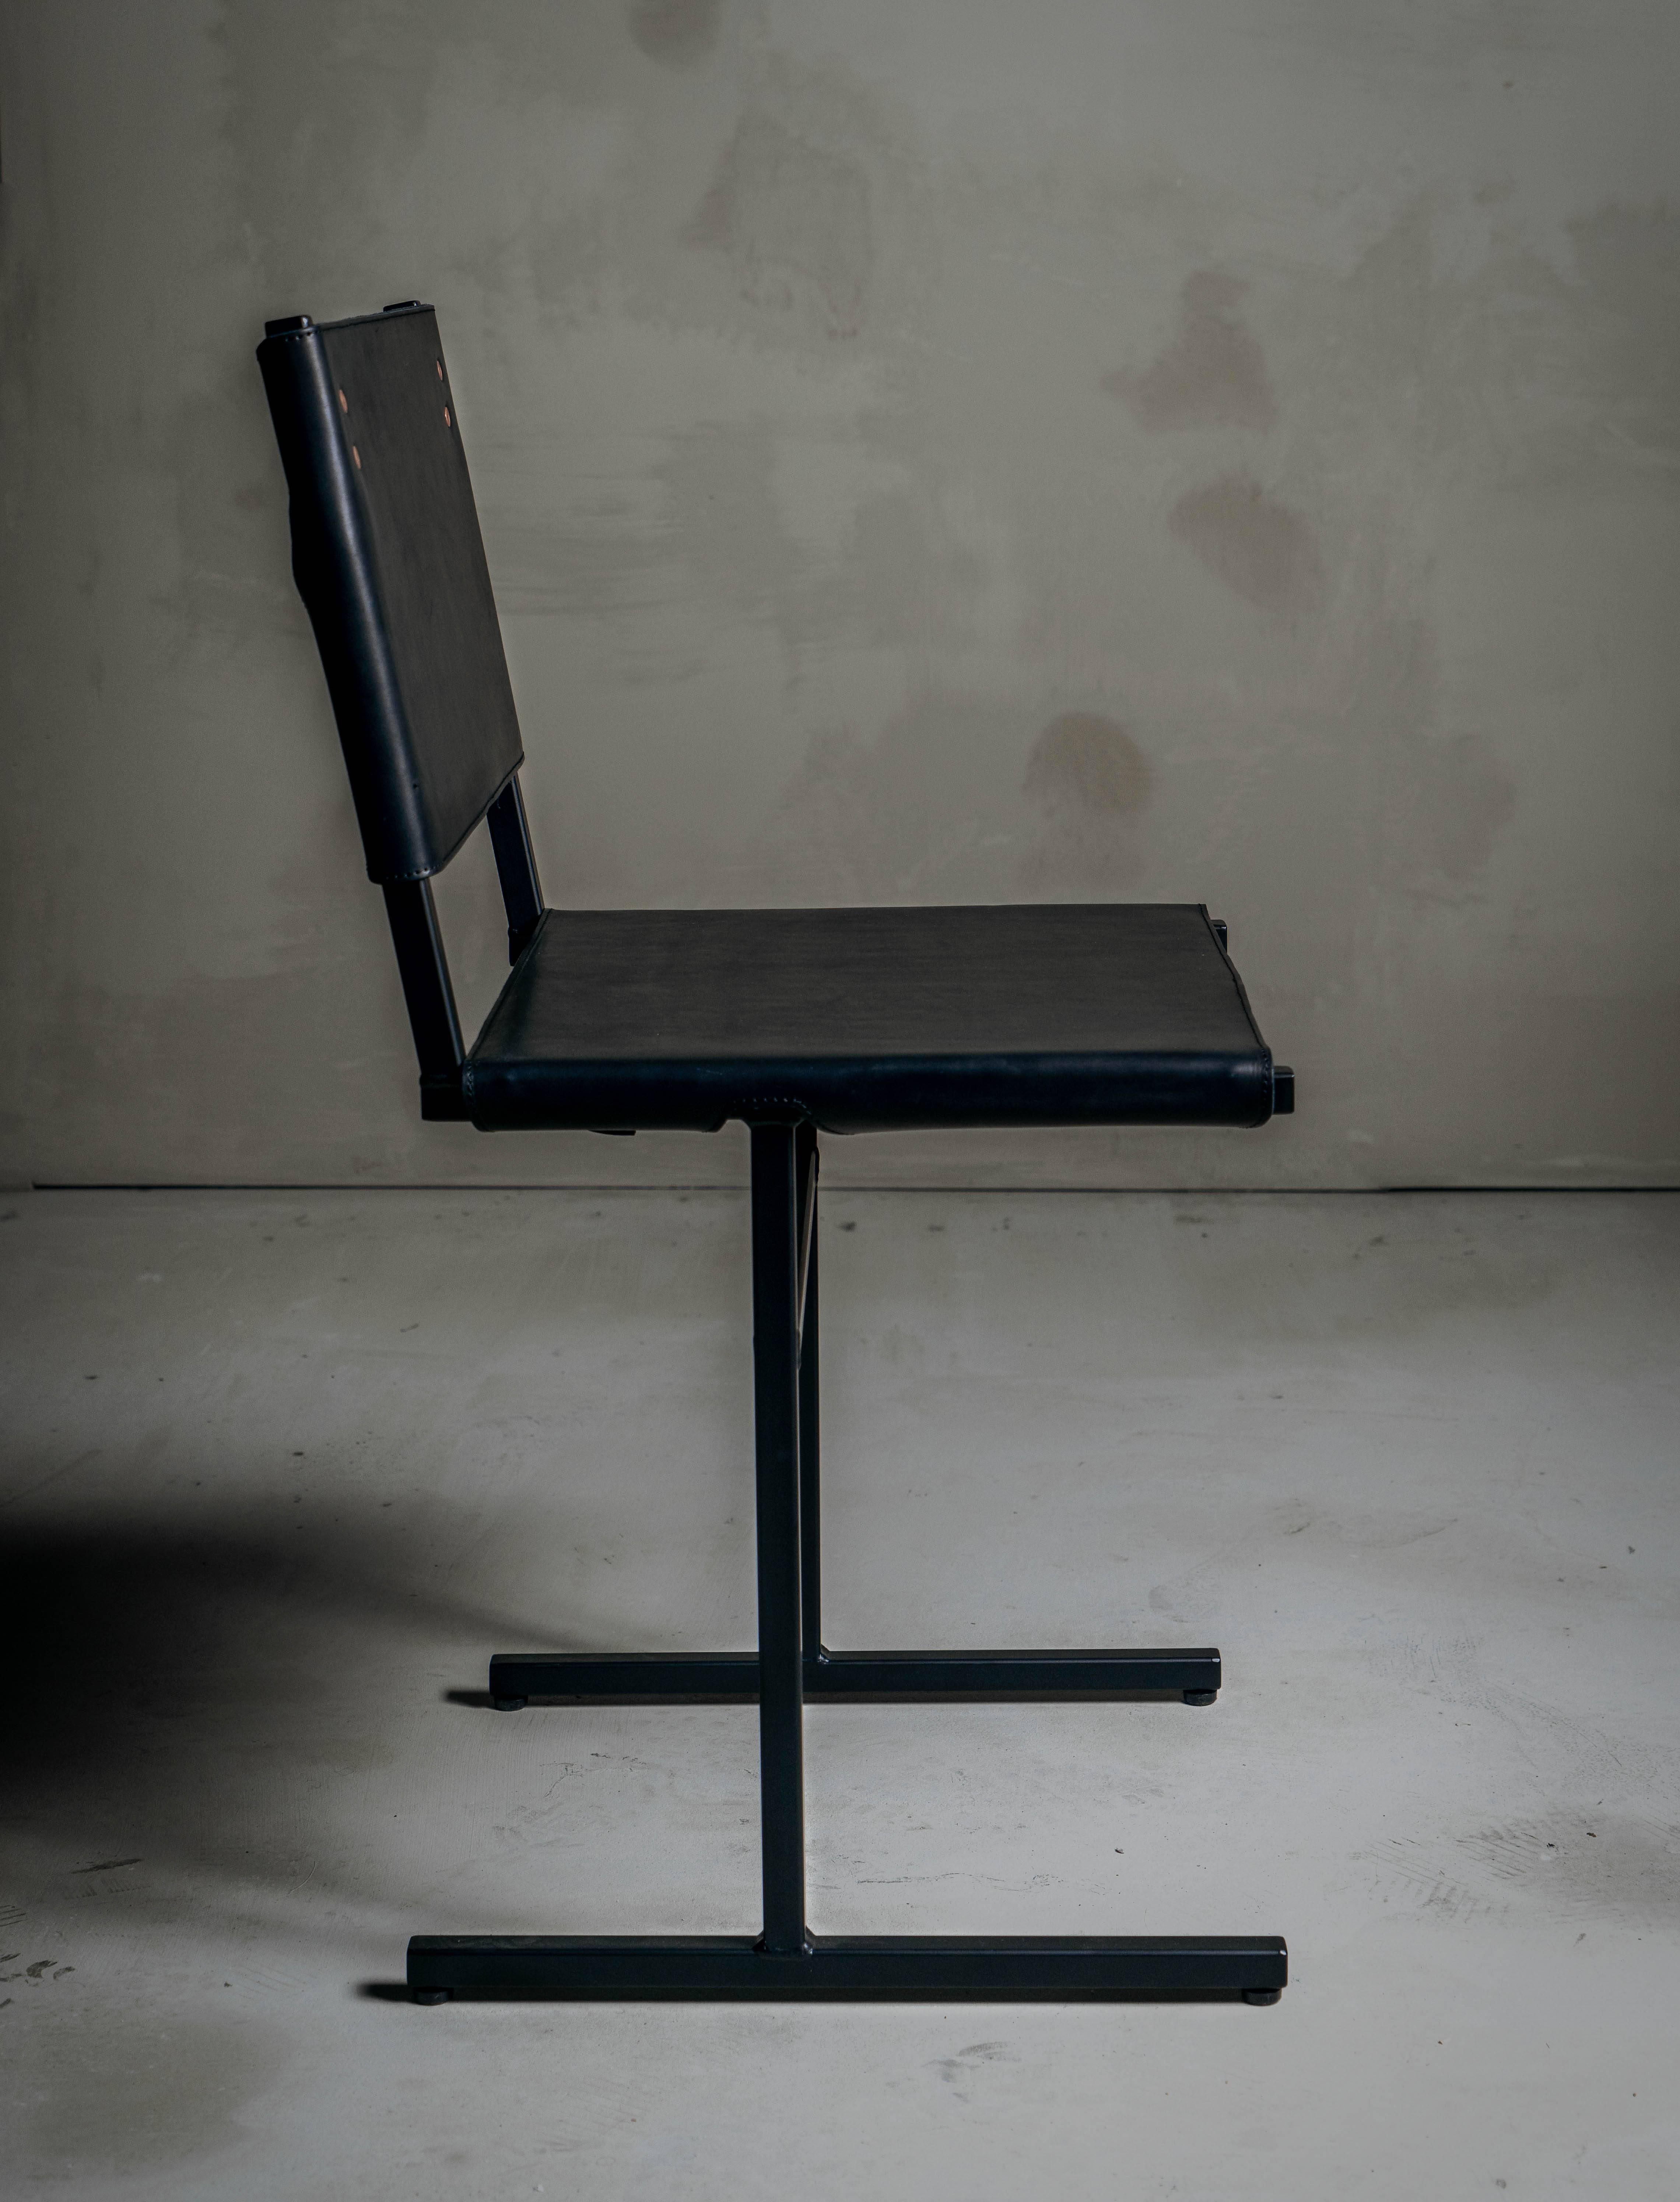 Memento barstool, Jesse Sanderson, WDSTCK Studio
Original signed chair by Jesse Sanderson
Dimensions: 80 x 40 x 45 cm
Seat height 47 cm

With a sturdy oak school chair from the 1950s in mind, Sanderson takes us back to his childhood and designs